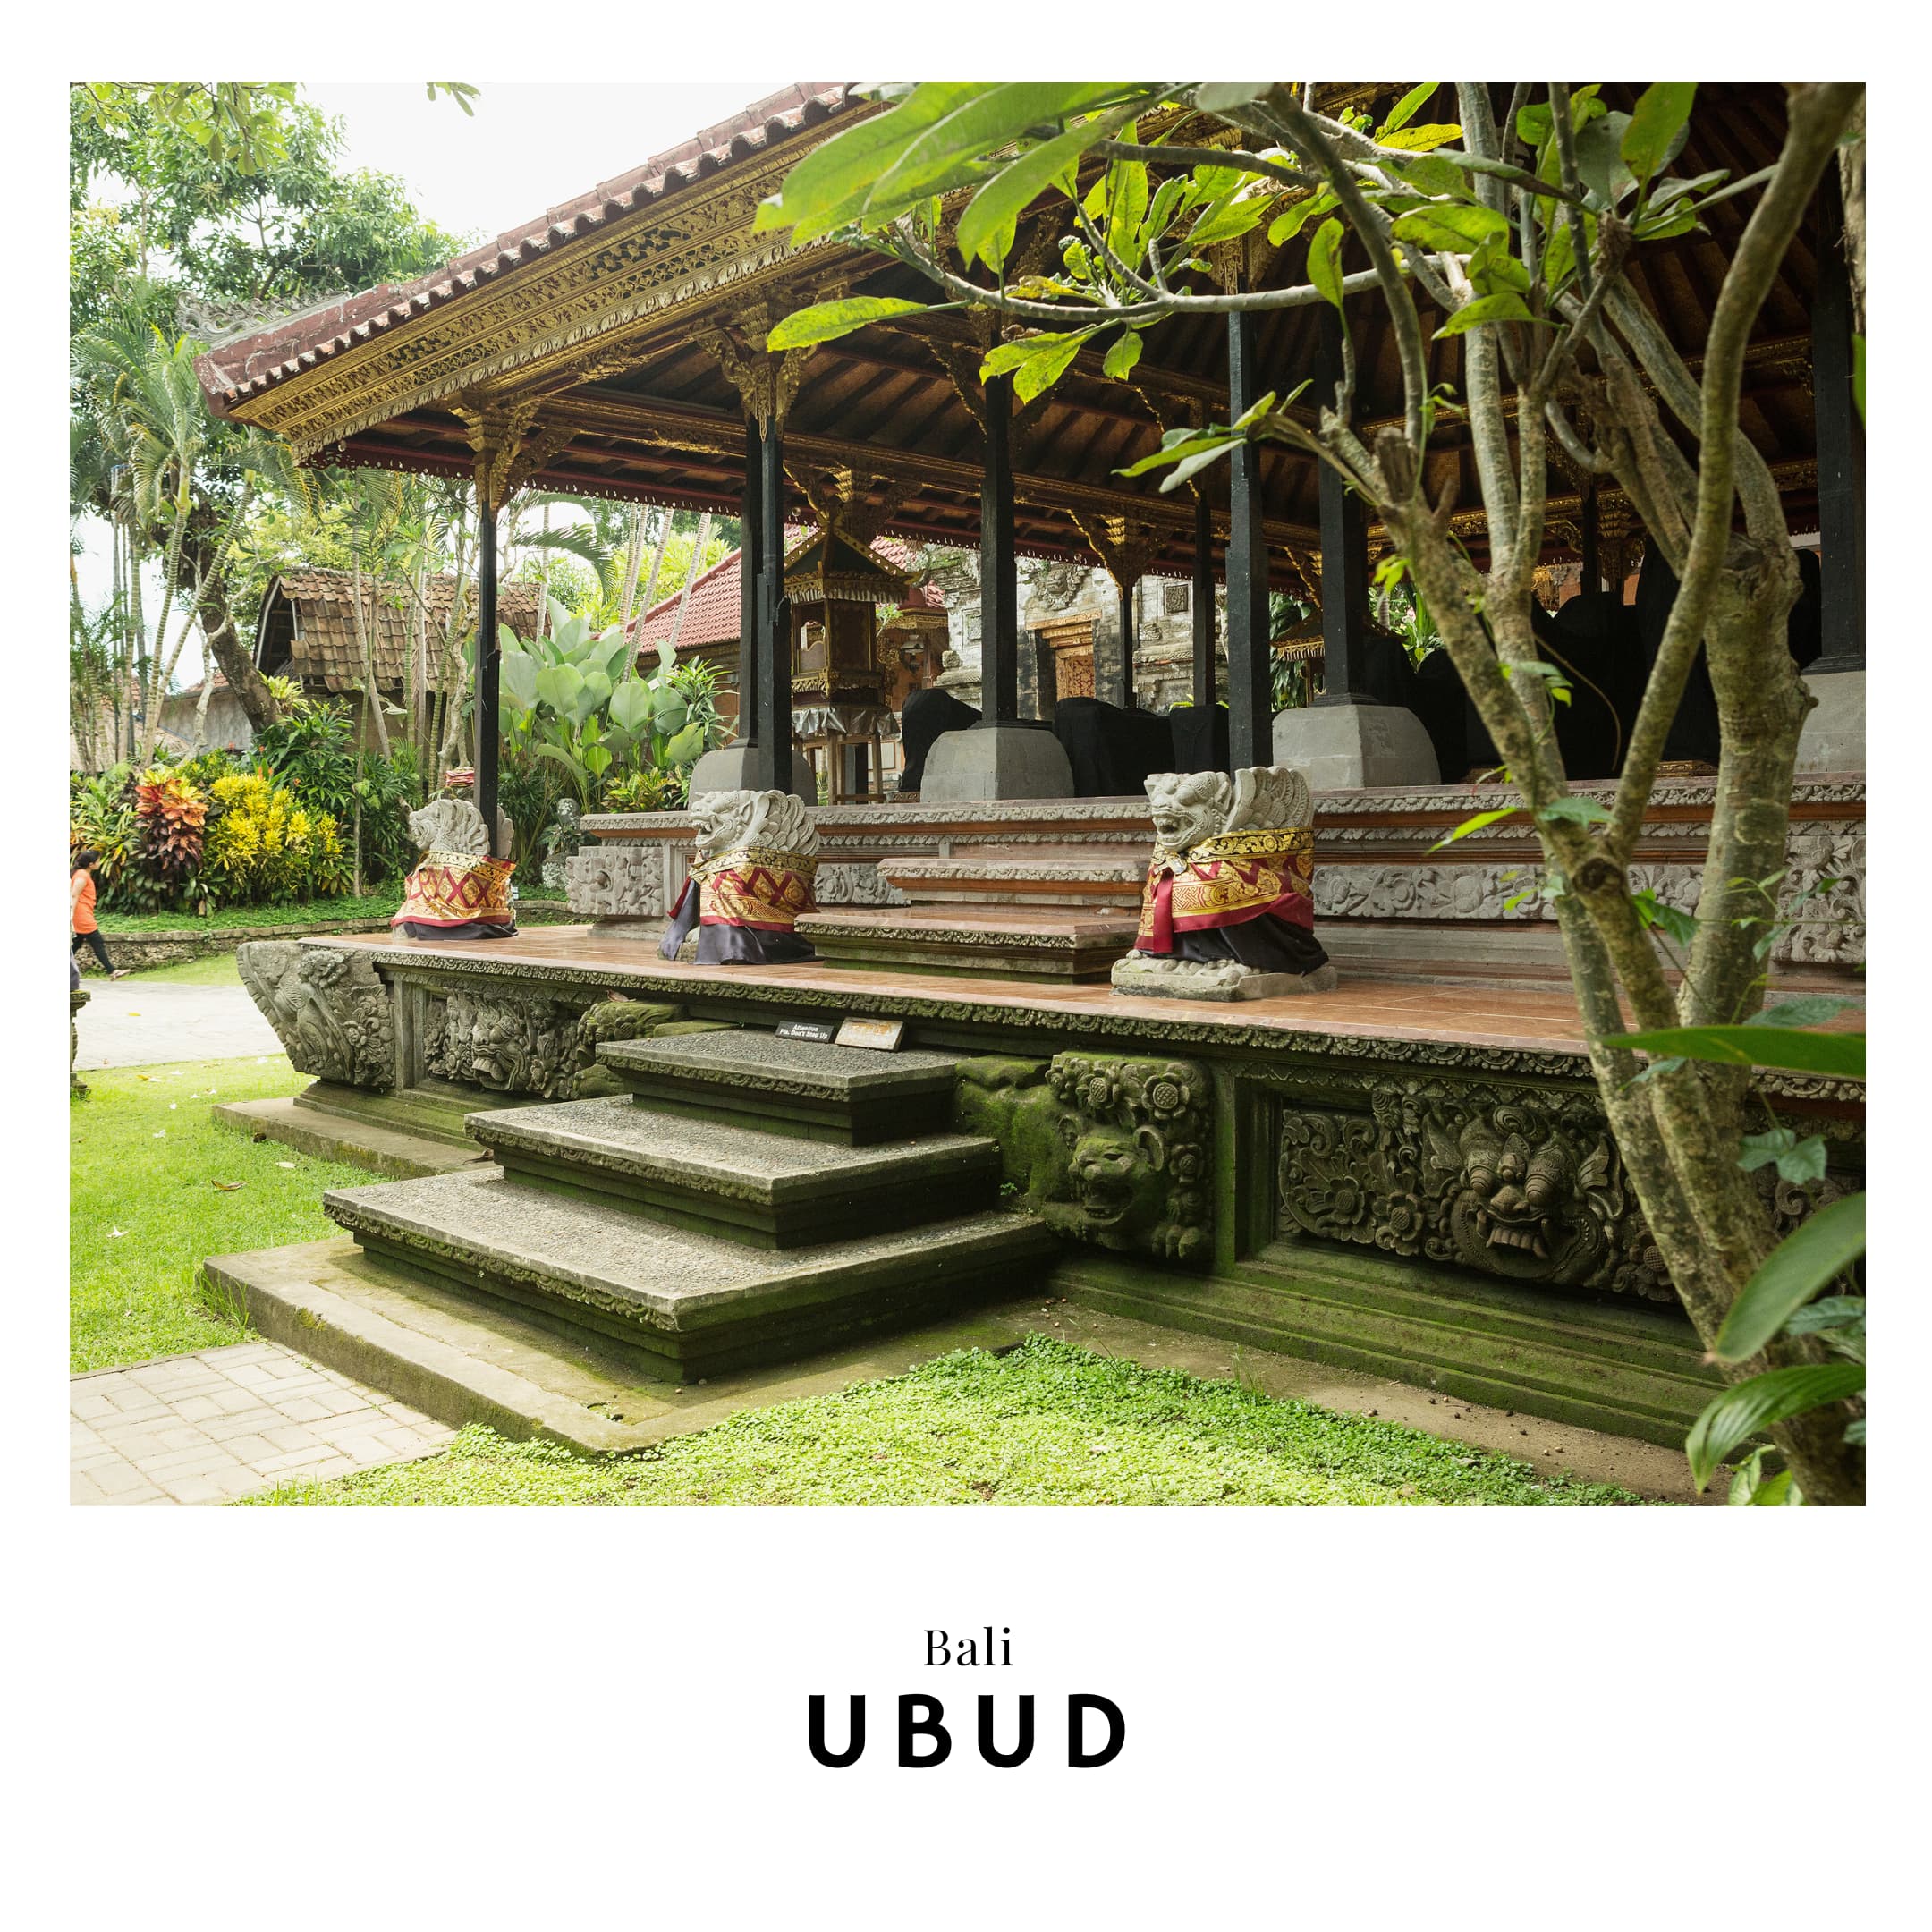 Link to the Ubud Travel Guide